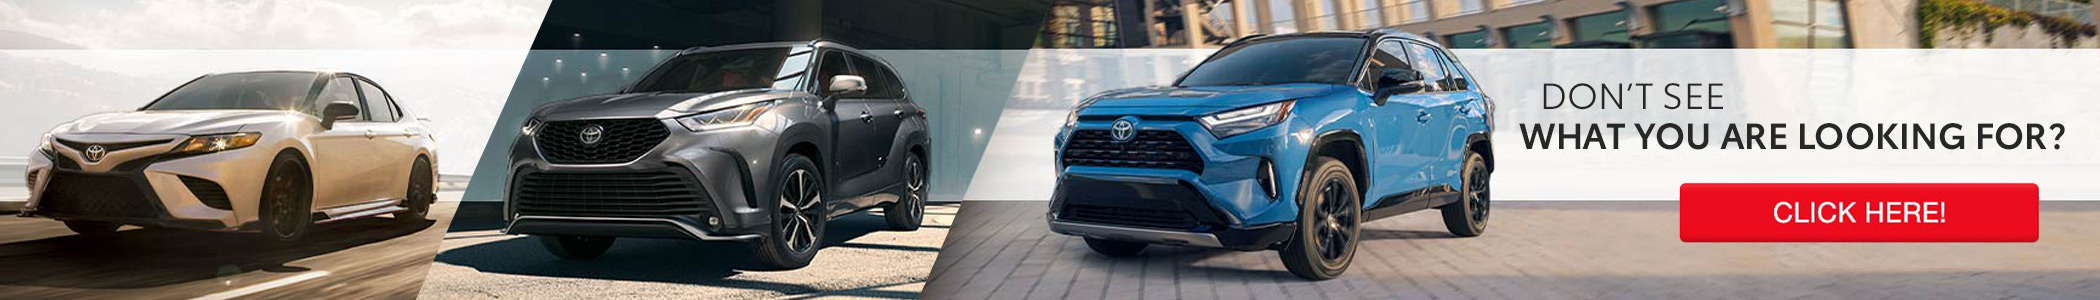 Downtown Toyota | Let us find your vehicle